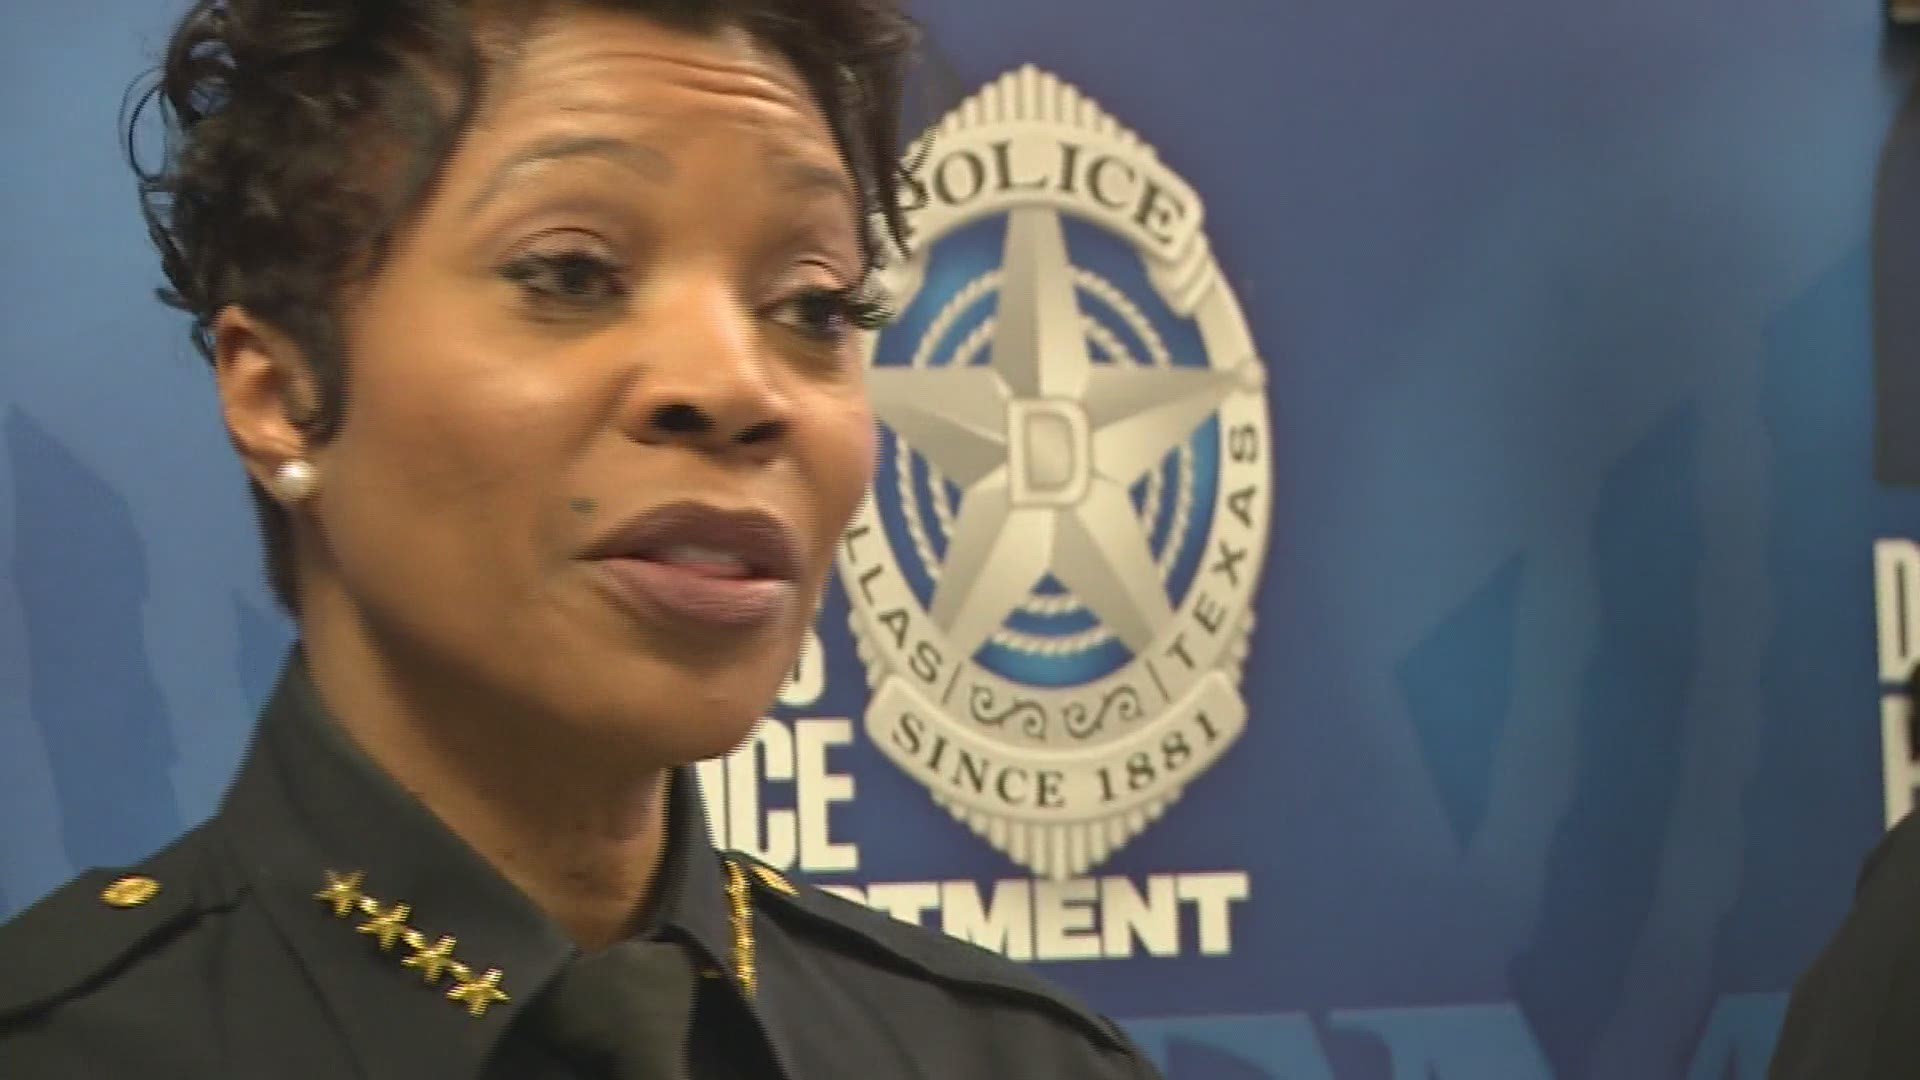 Dallas Police Chief Renee Hall became visibly upset as she told the room "this s*** has to STOP," while speaking about the shooting death of 1-year-old Rory Norman